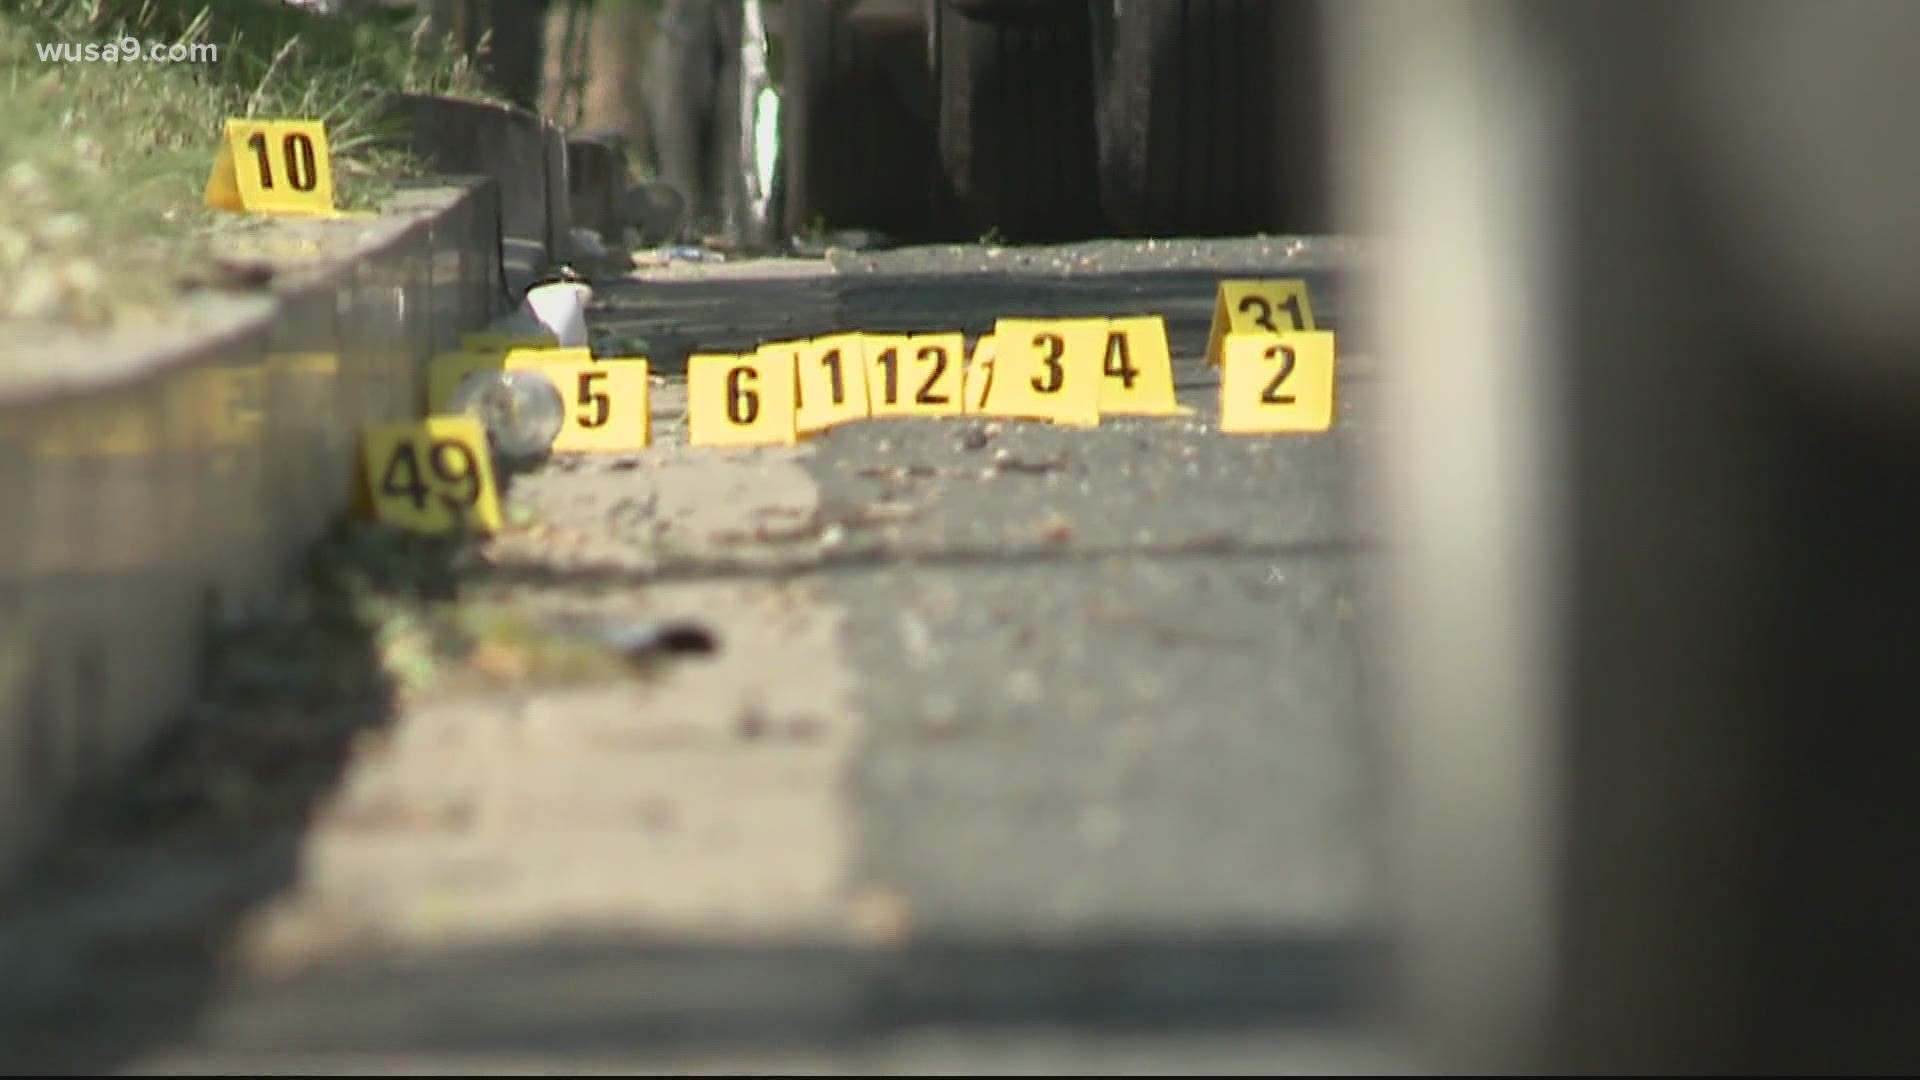 In all, eight people have been shot on Sunday amid shootings in D.C., according to MPD.